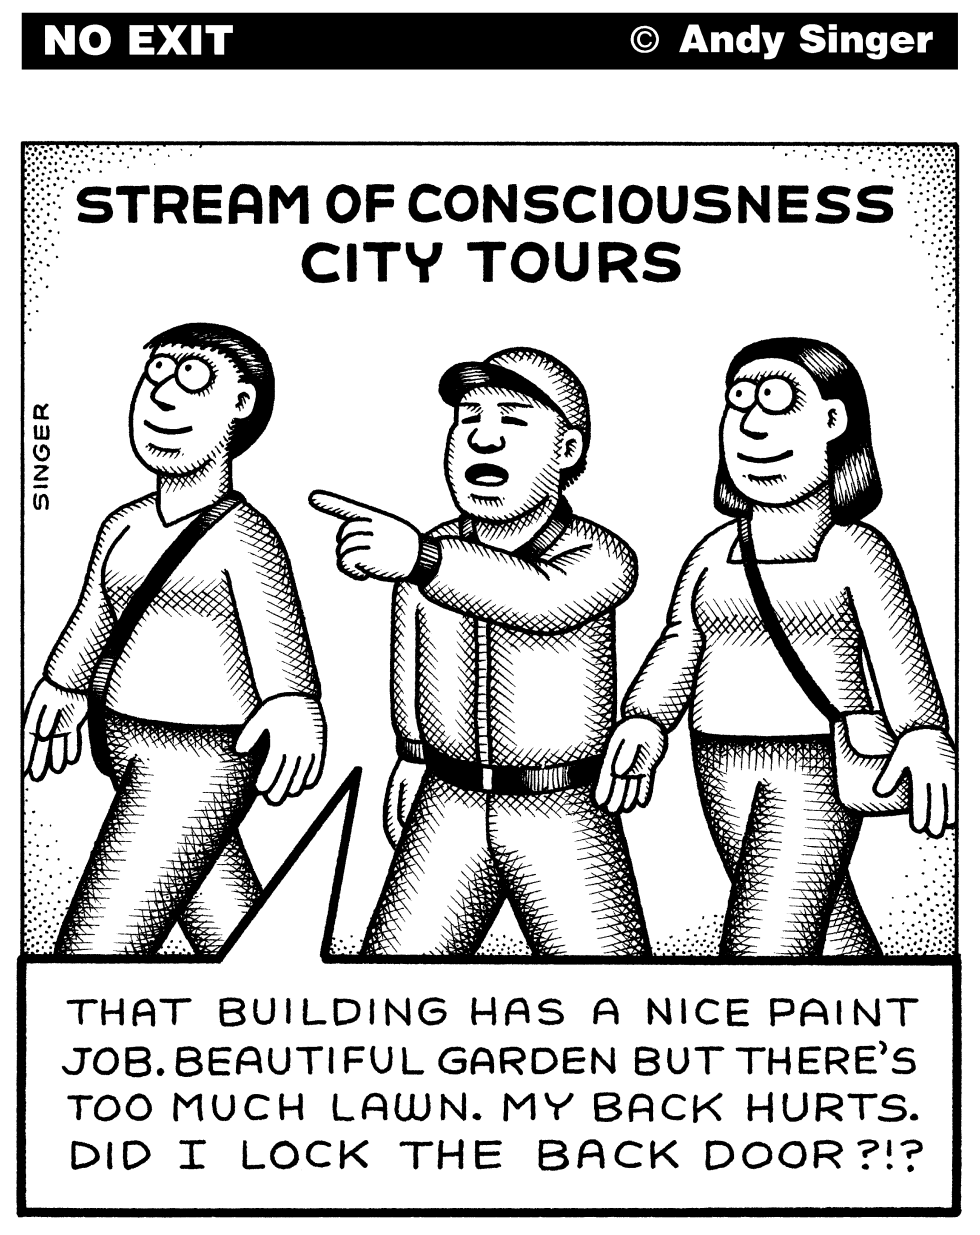 STREAM OF CONSCIOUSNESS CITY TOURS by Andy Singer